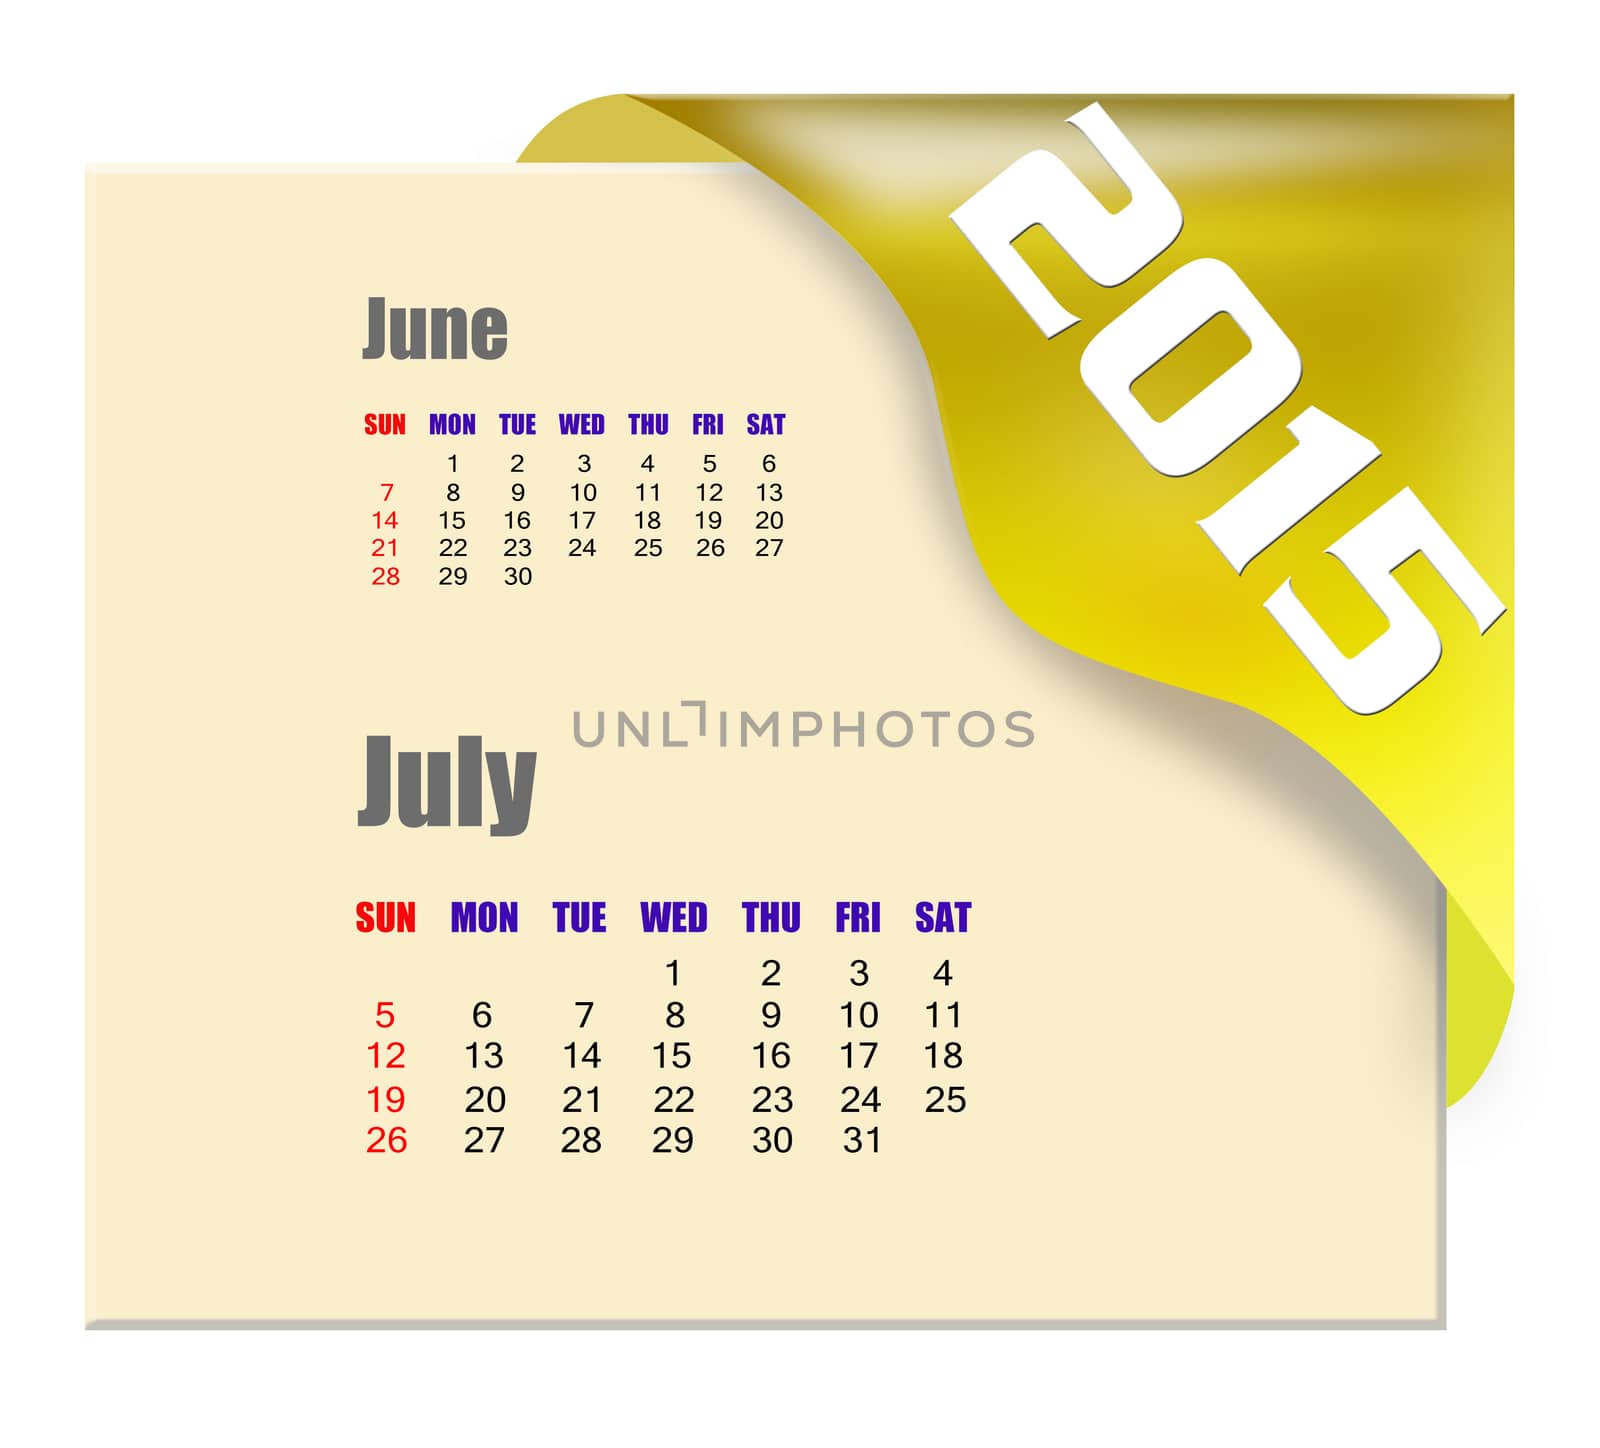 July 2015 calendar with past month series